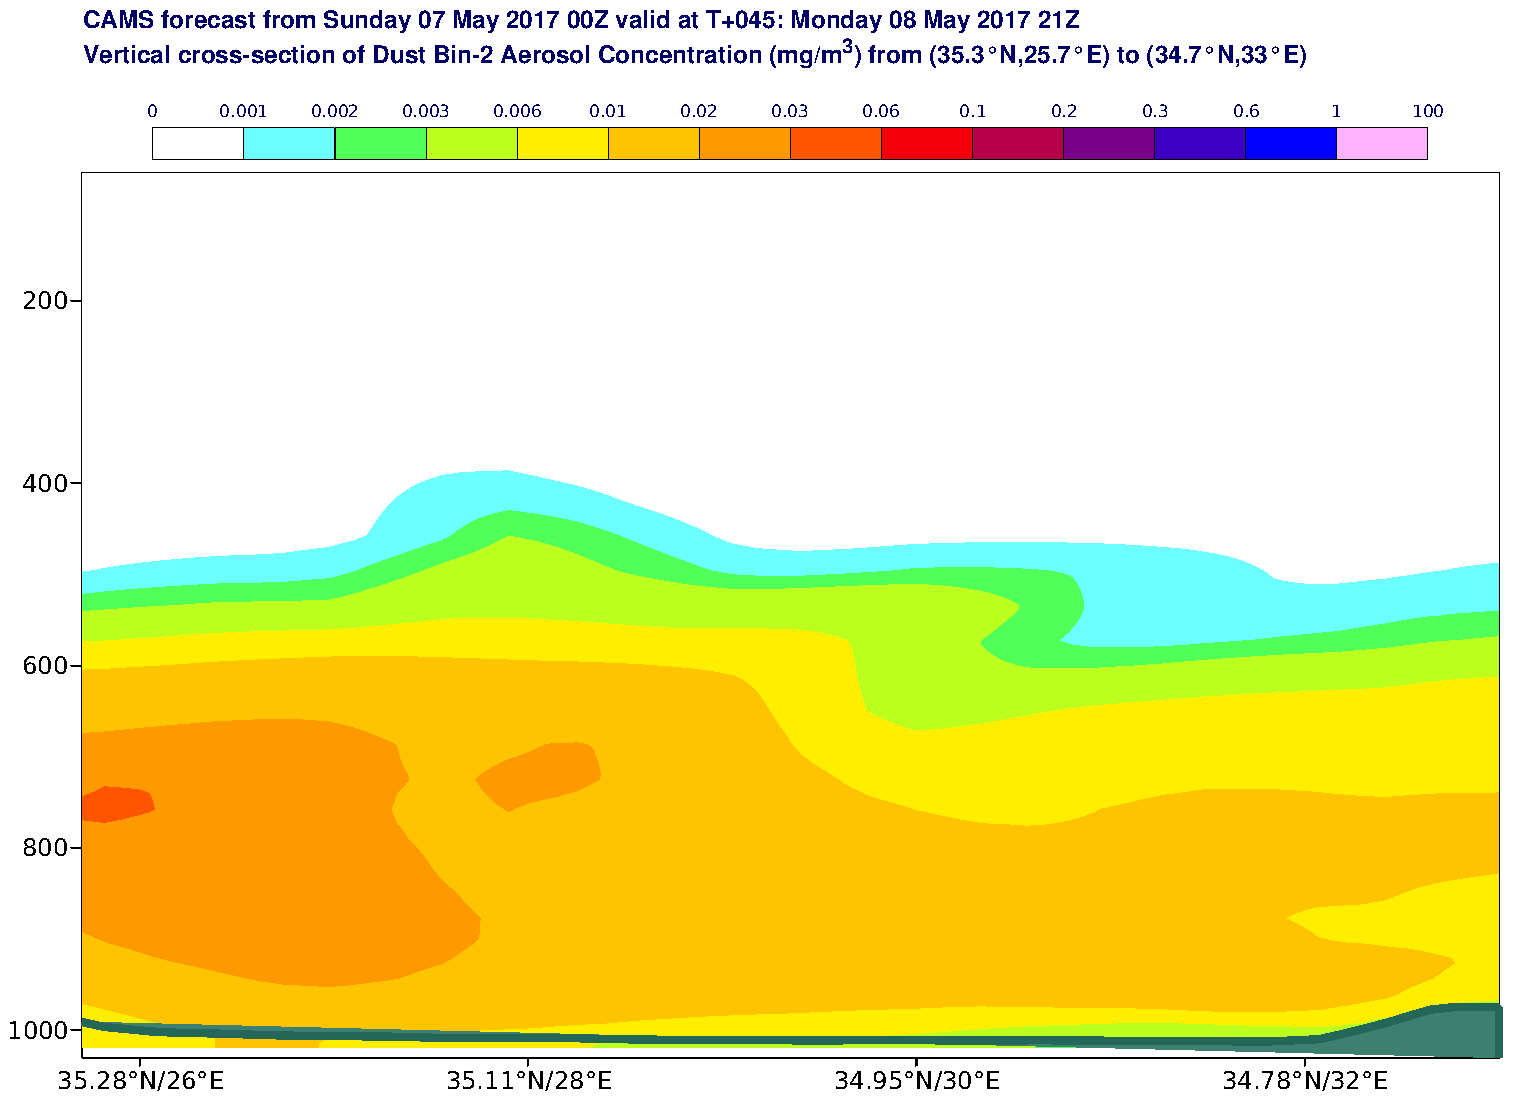 Vertical cross-section of Dust Bin-2 Aerosol Concentration (mg/m3) valid at T45 - 2017-05-08 21:00